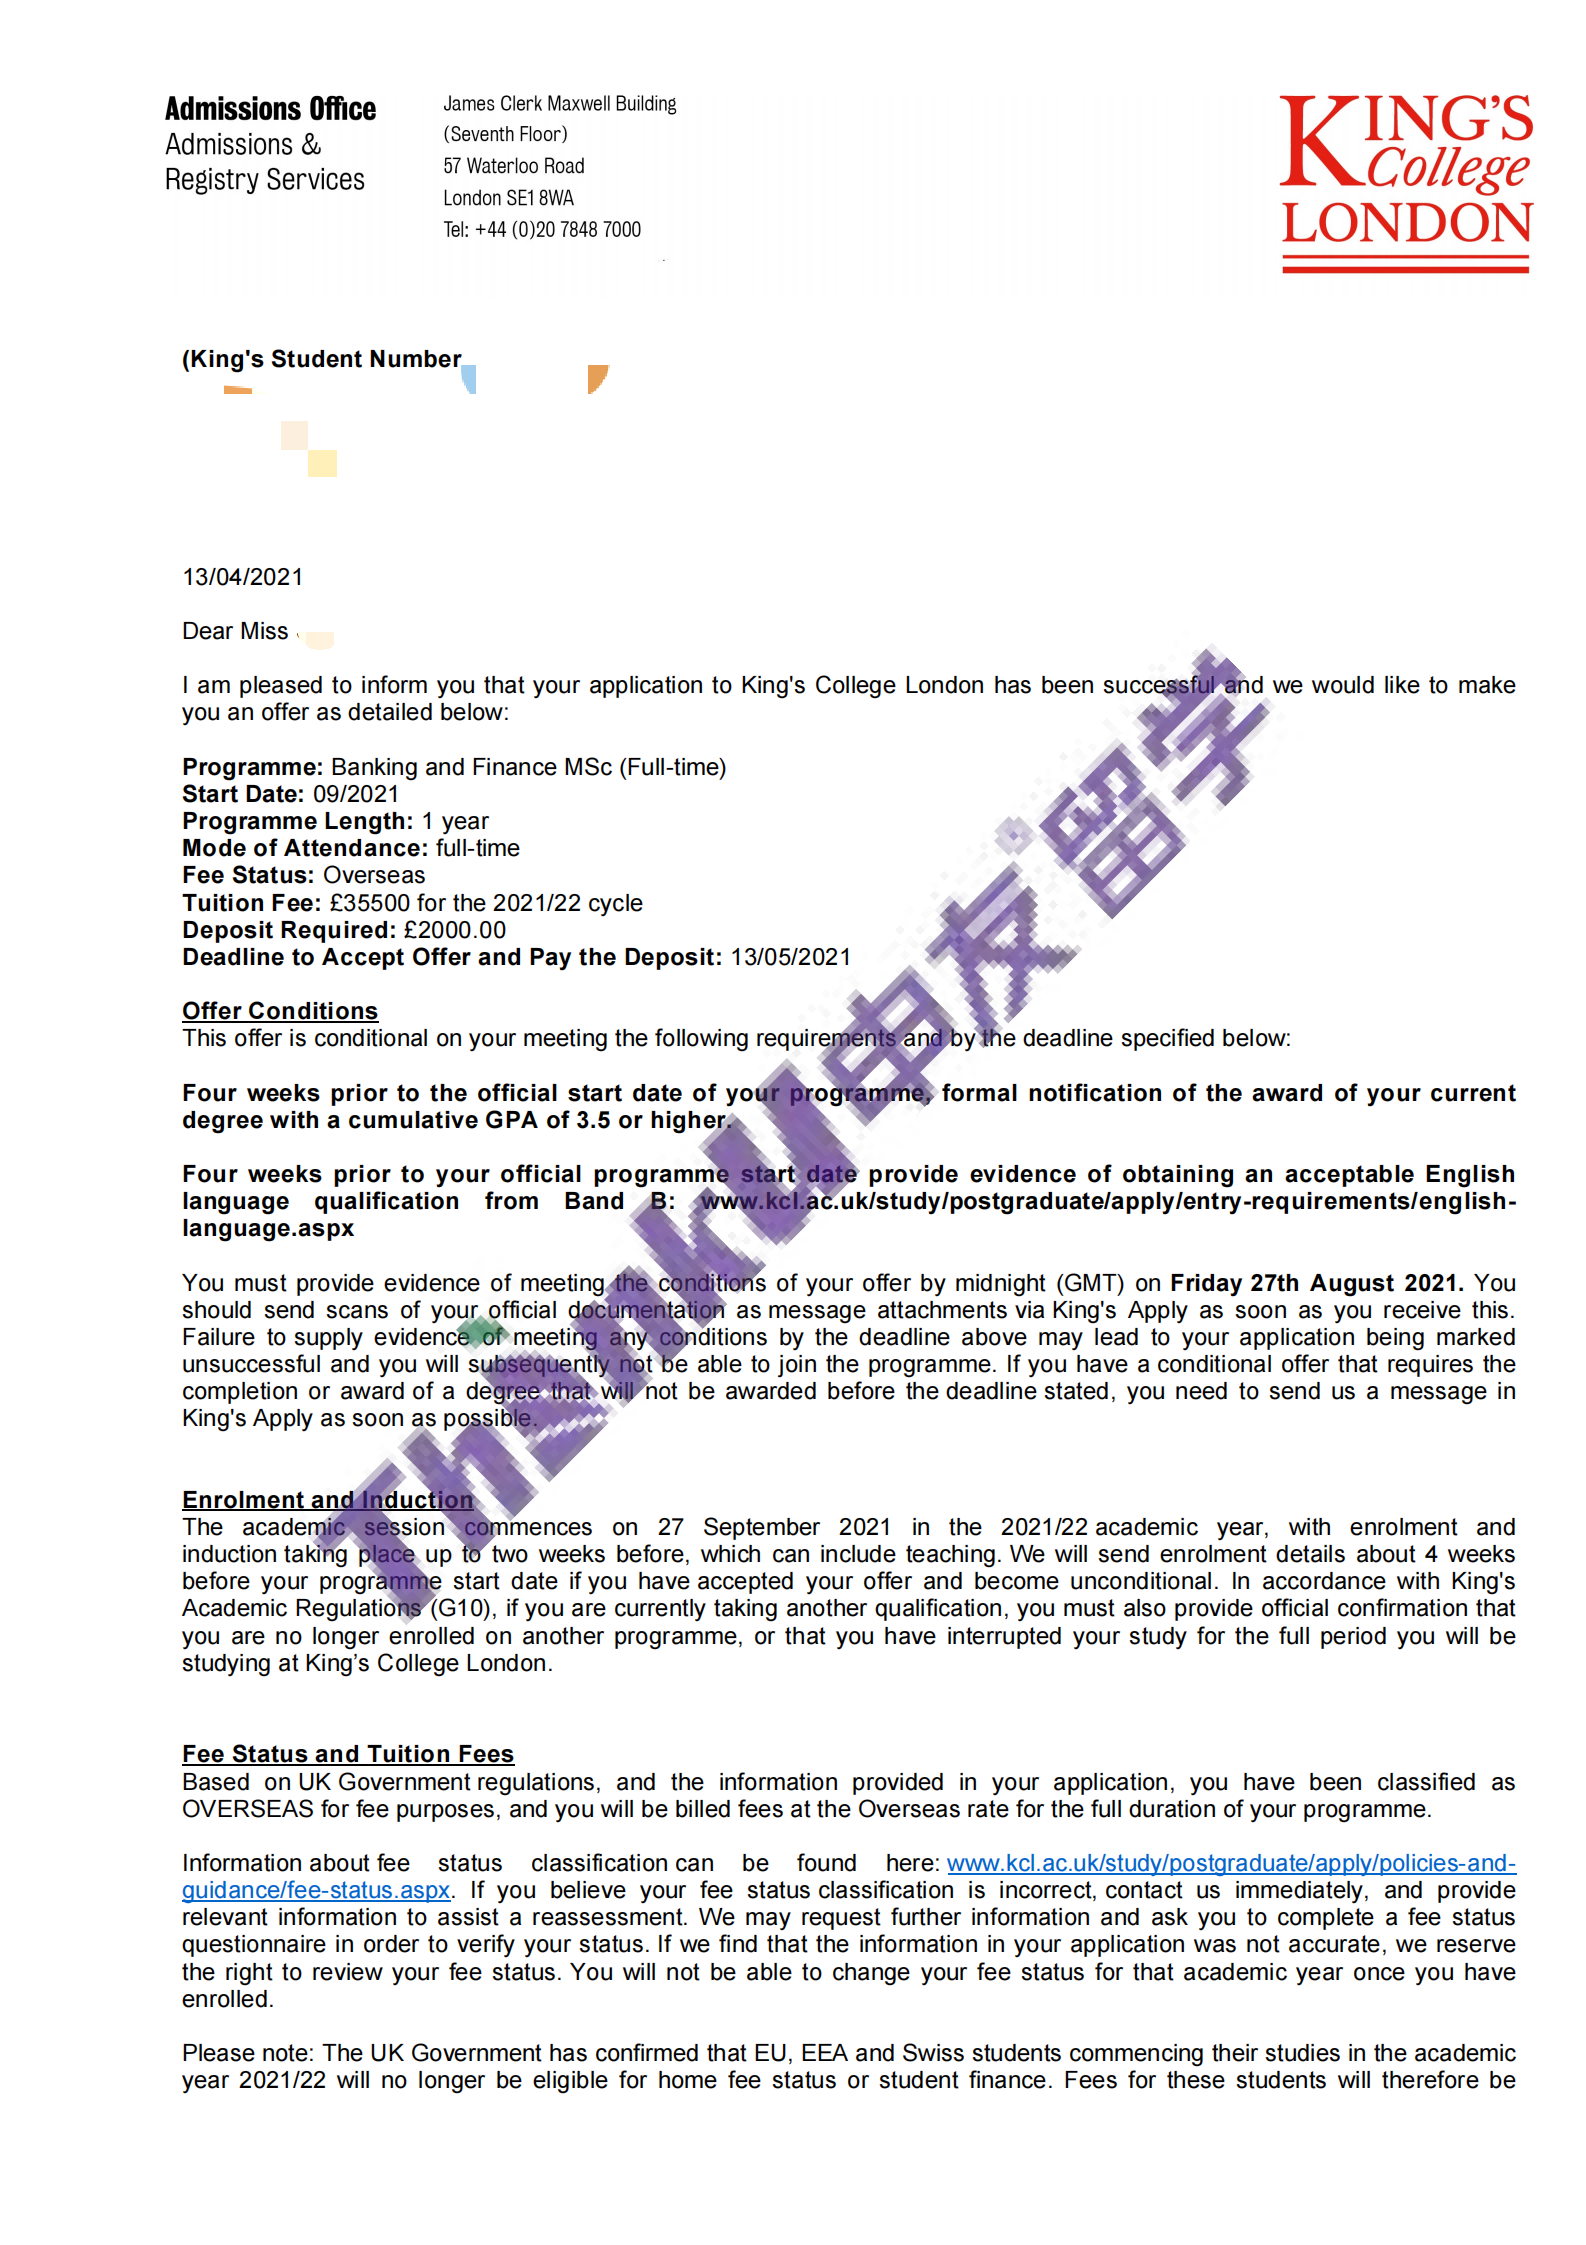 kcl offer_00(1).png